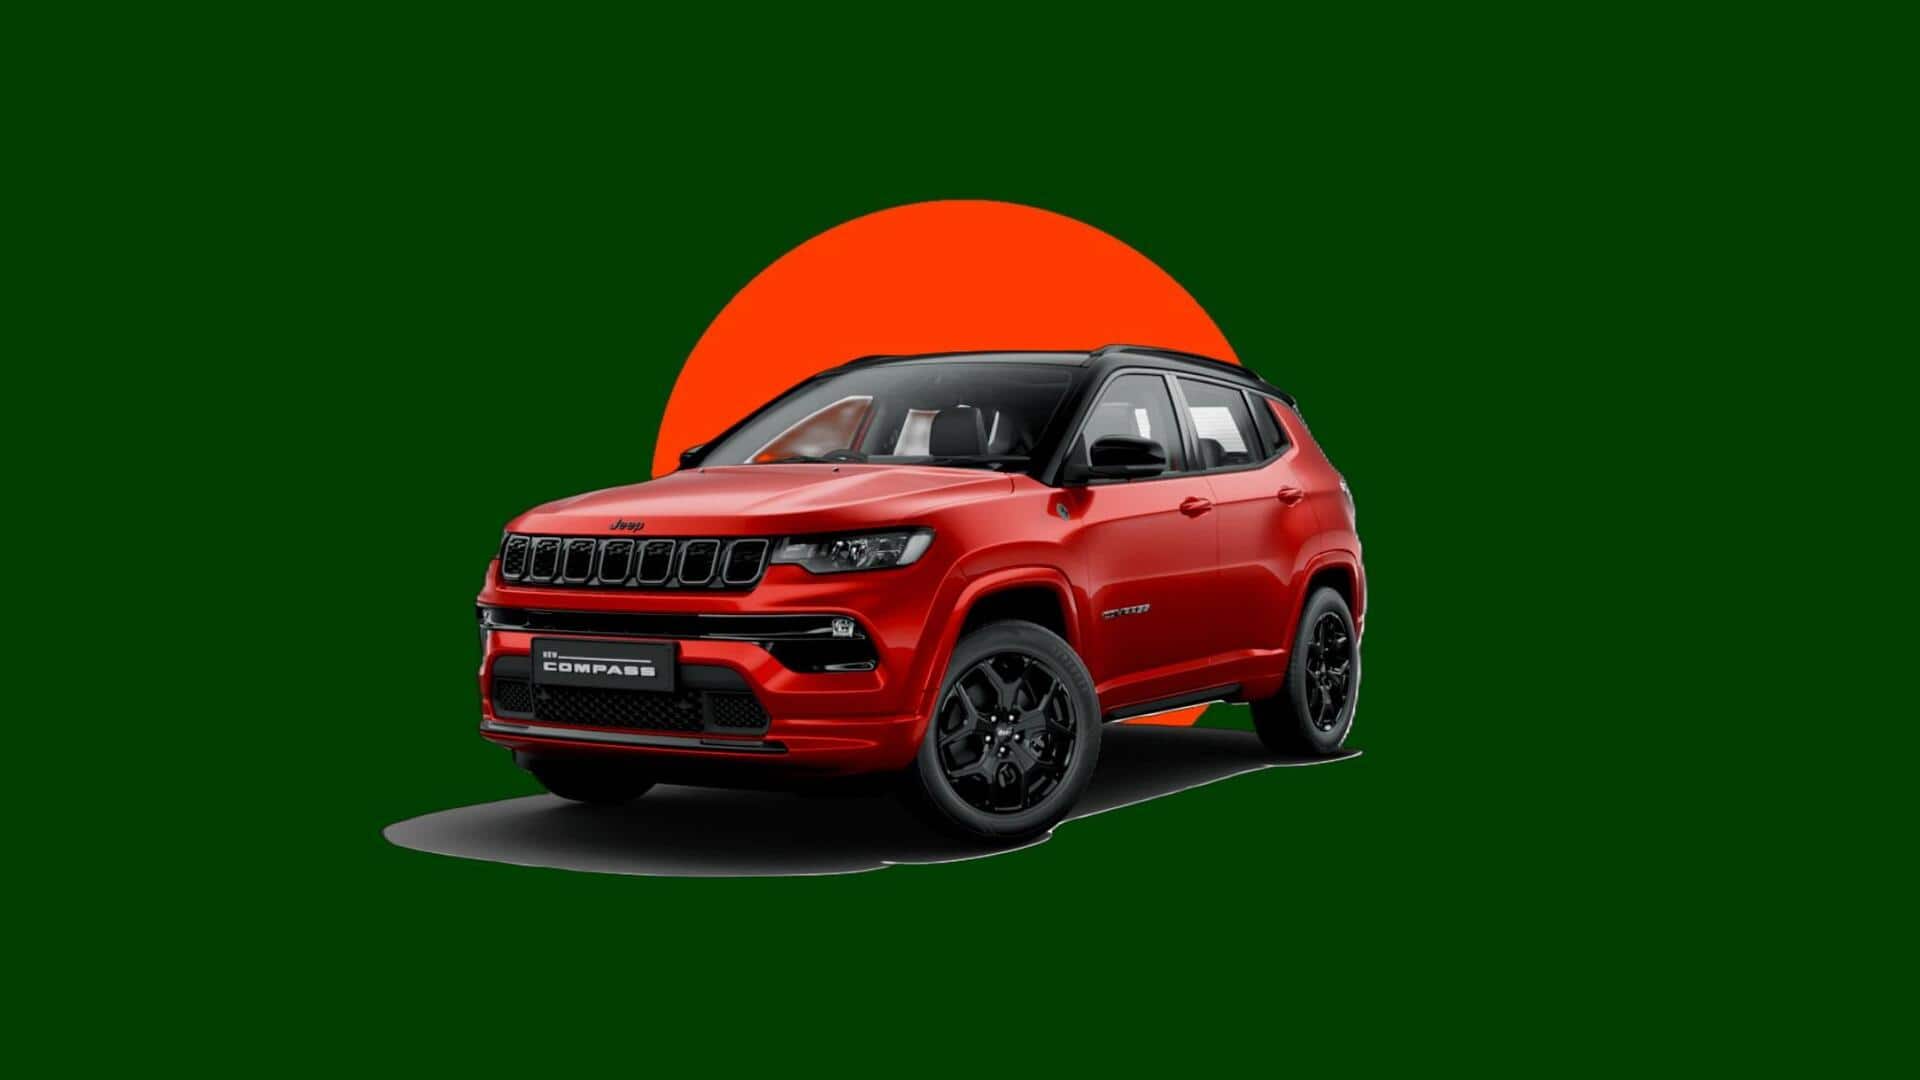 New-generation Jeep Compass to get electric powertrain in India